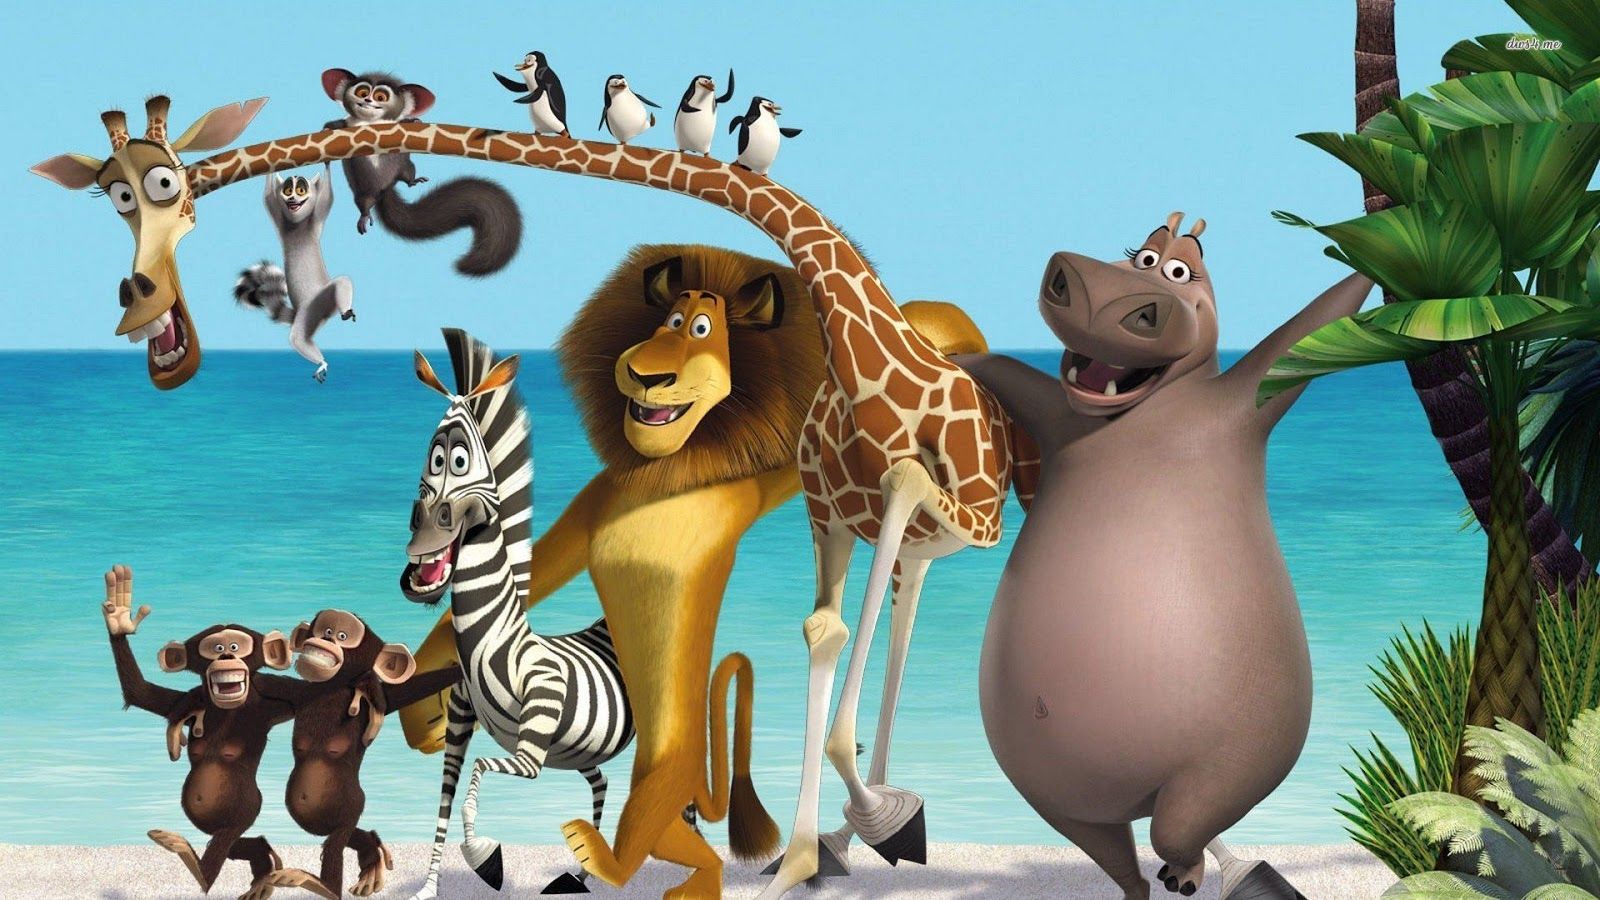 Greath View Cartoon Movie Scenery Of Madagascar Wallpaper Picture HD Image